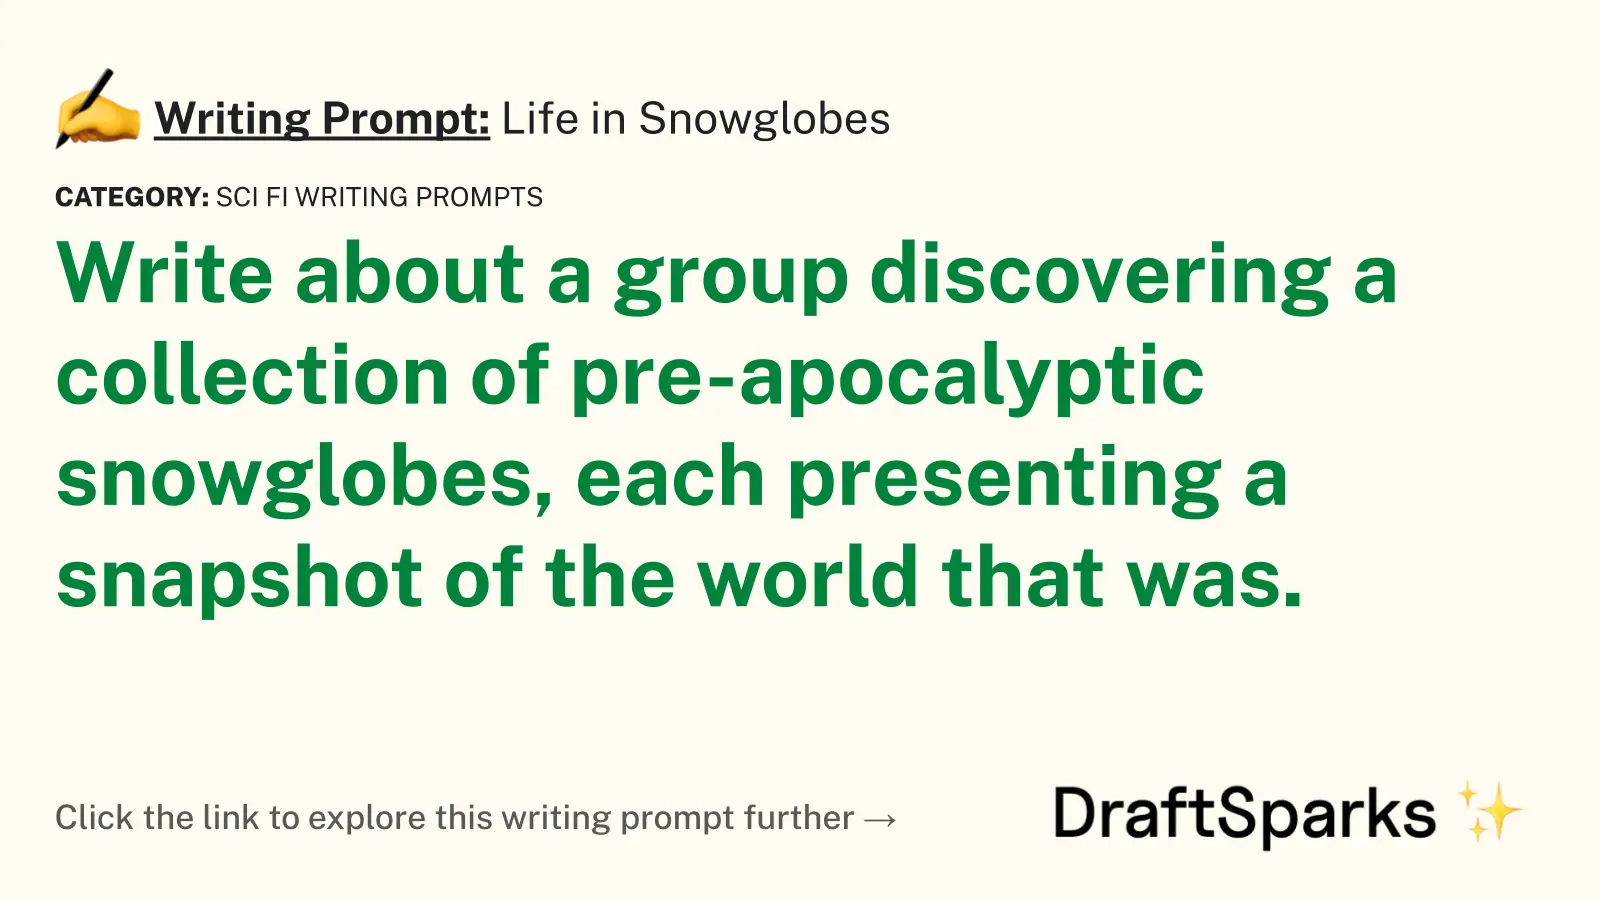 Life in Snowglobes